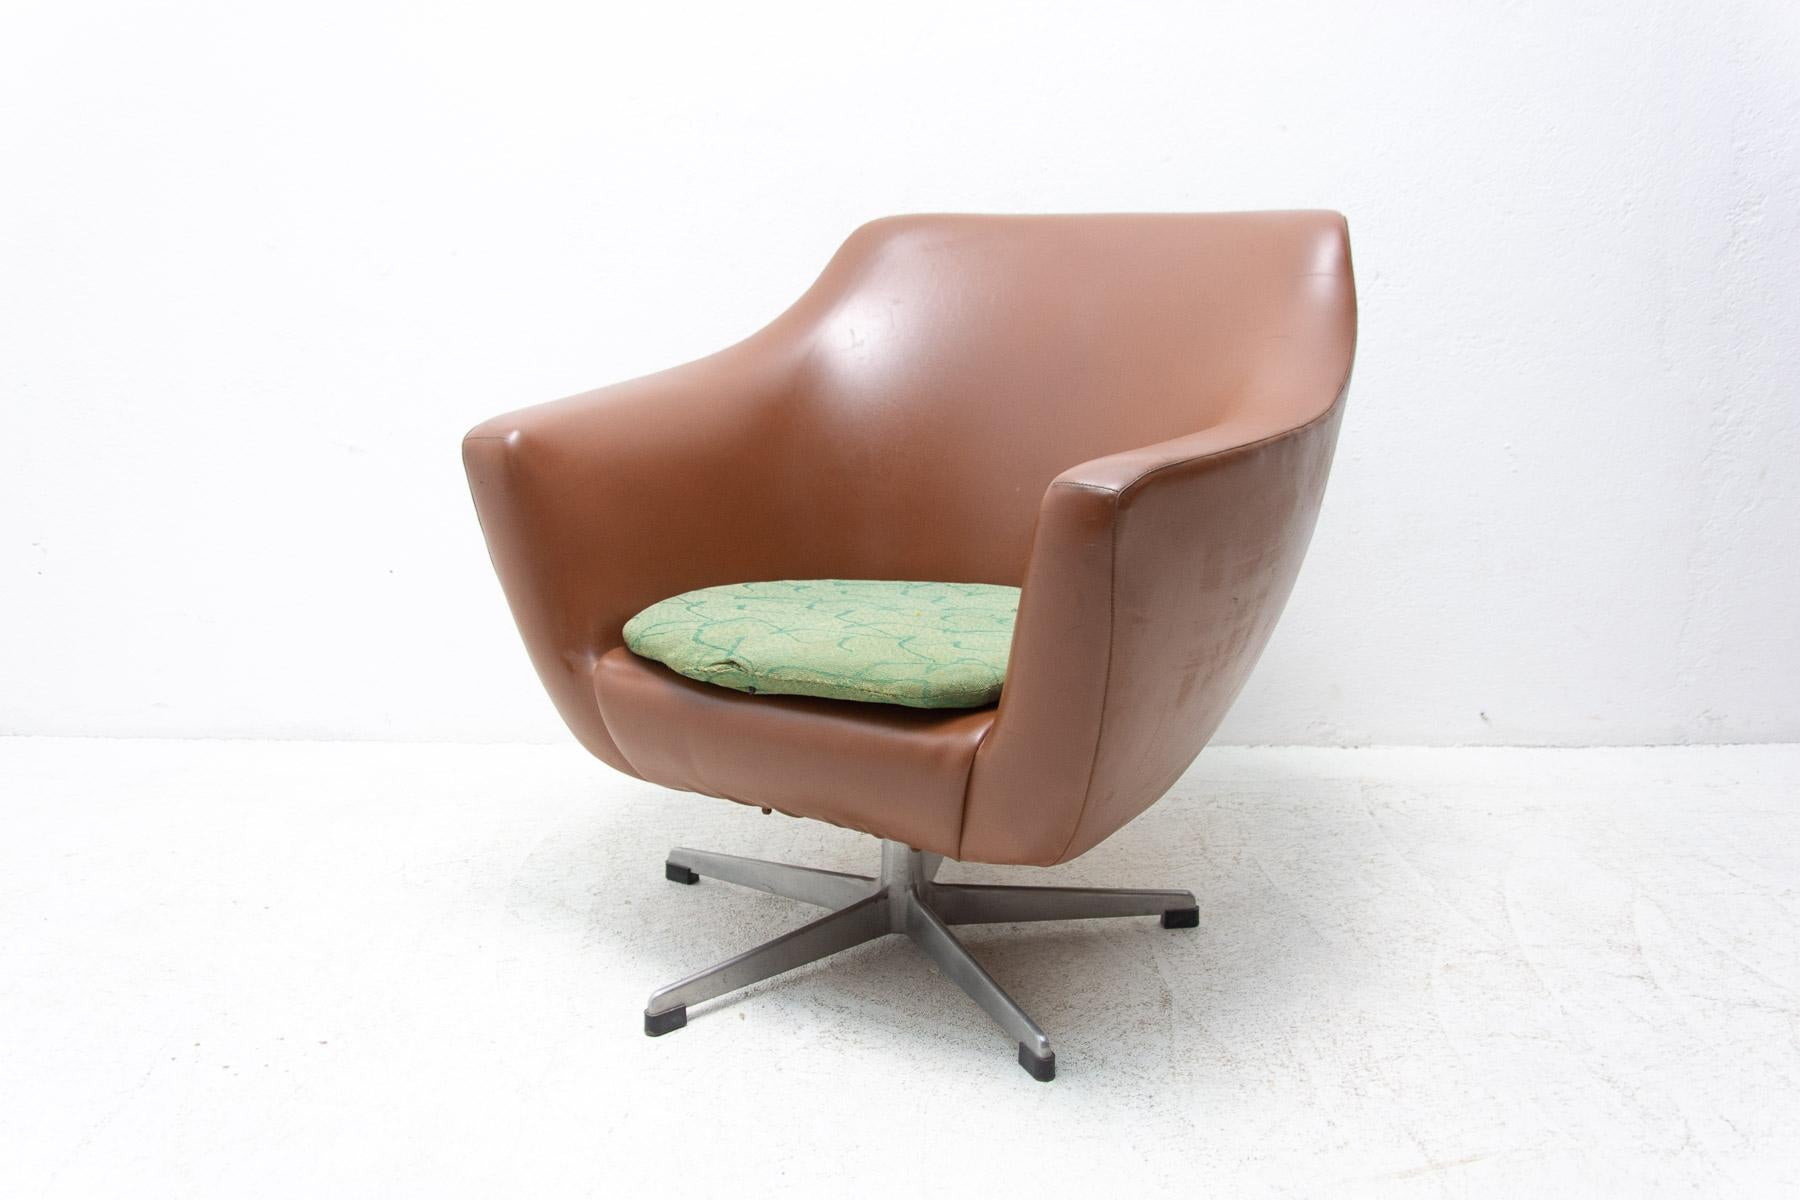 Vintage swivel chair made by the famous UP Zavody company. This type of chairs is characterized by their innovative molded expanded construction which provide an extremely lightweight and durable design. The iconic chair features a round contoured